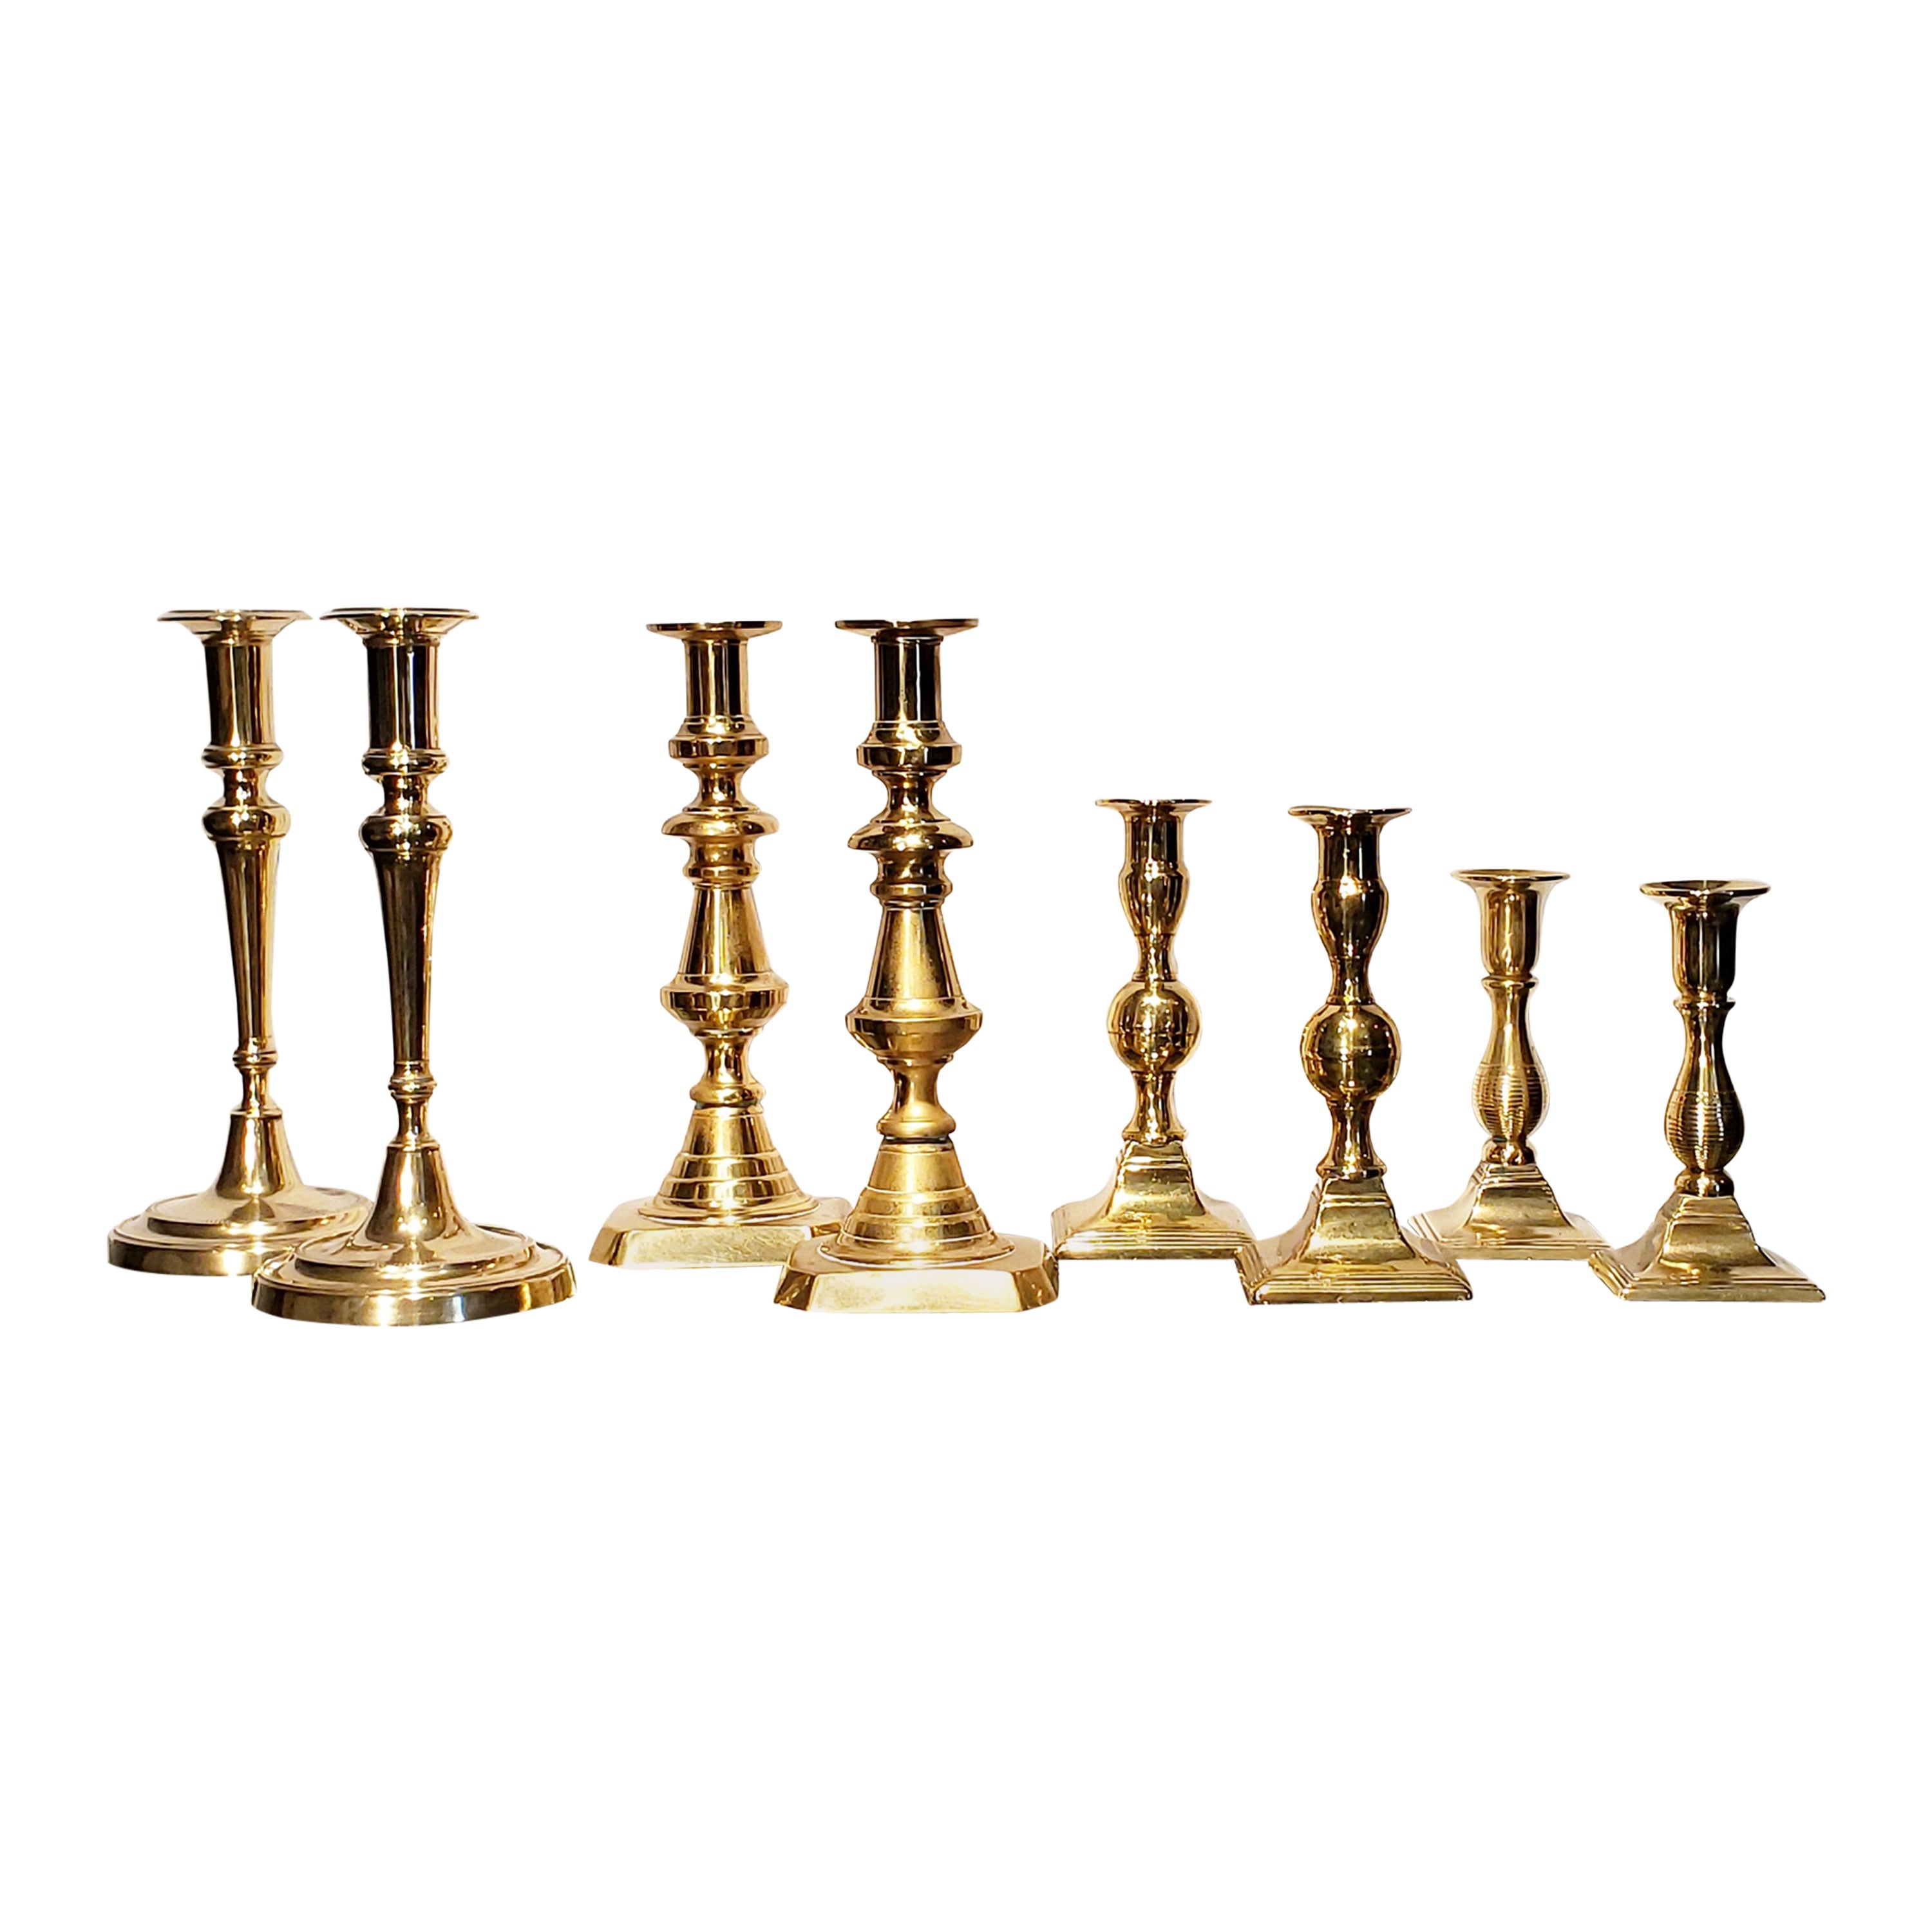 Four Pairs of 19th Century Brass Candlesticks